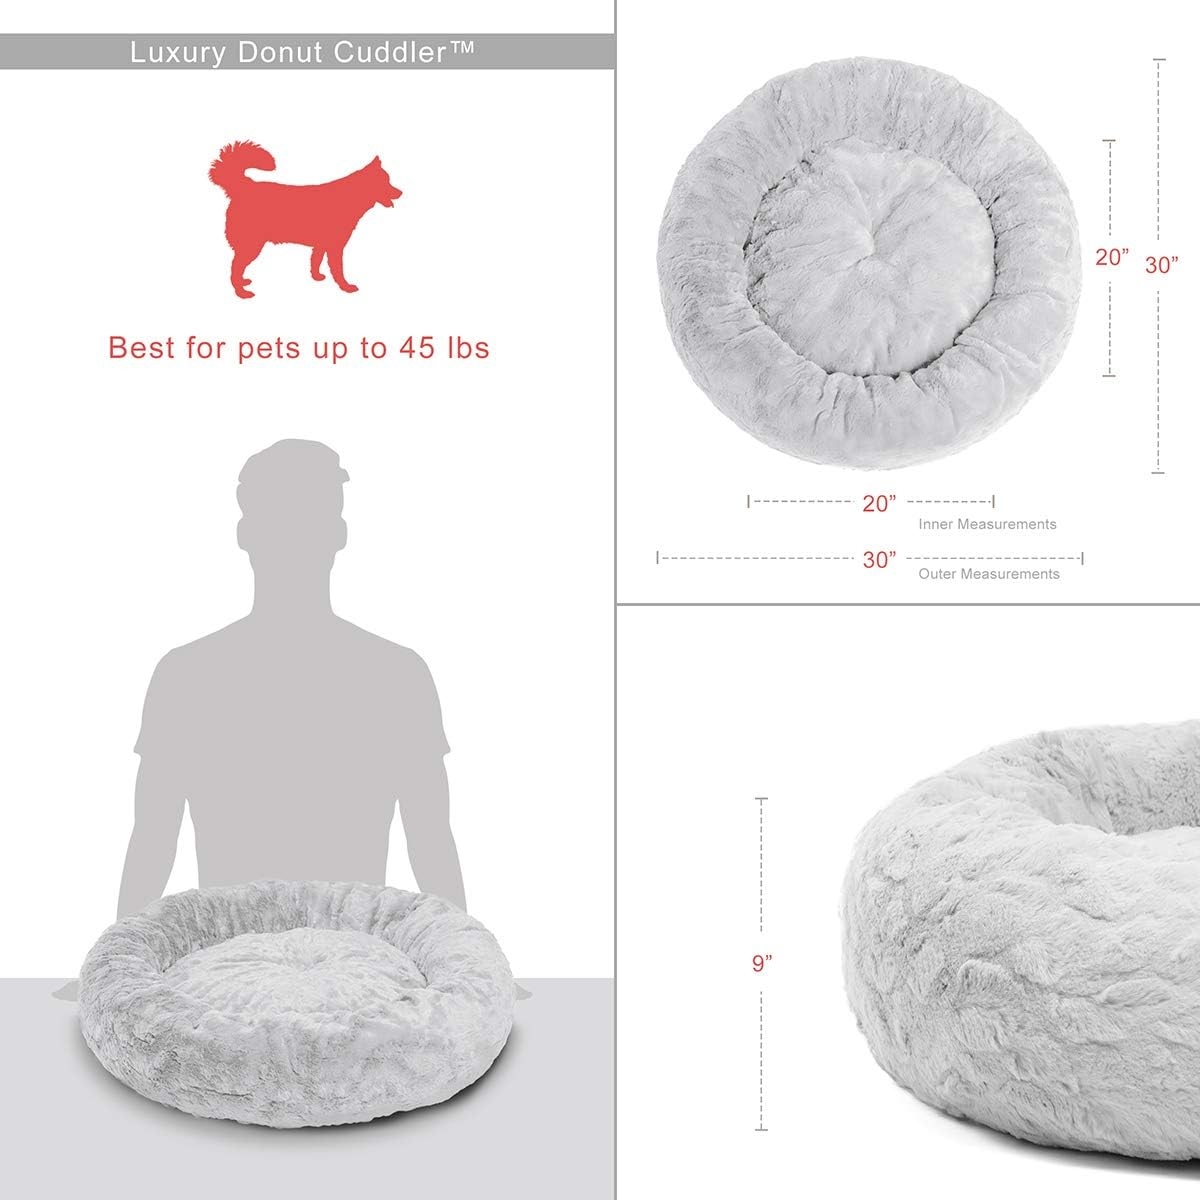 Best Friends by Sheri The Original Calming Donut Cat and Dog Bed in Lux Fur, Machine Washable Removable Zipper Cover, Orthopedic Relief, for Pets up to 45 lbs. - Medium 30"X30" in Gray